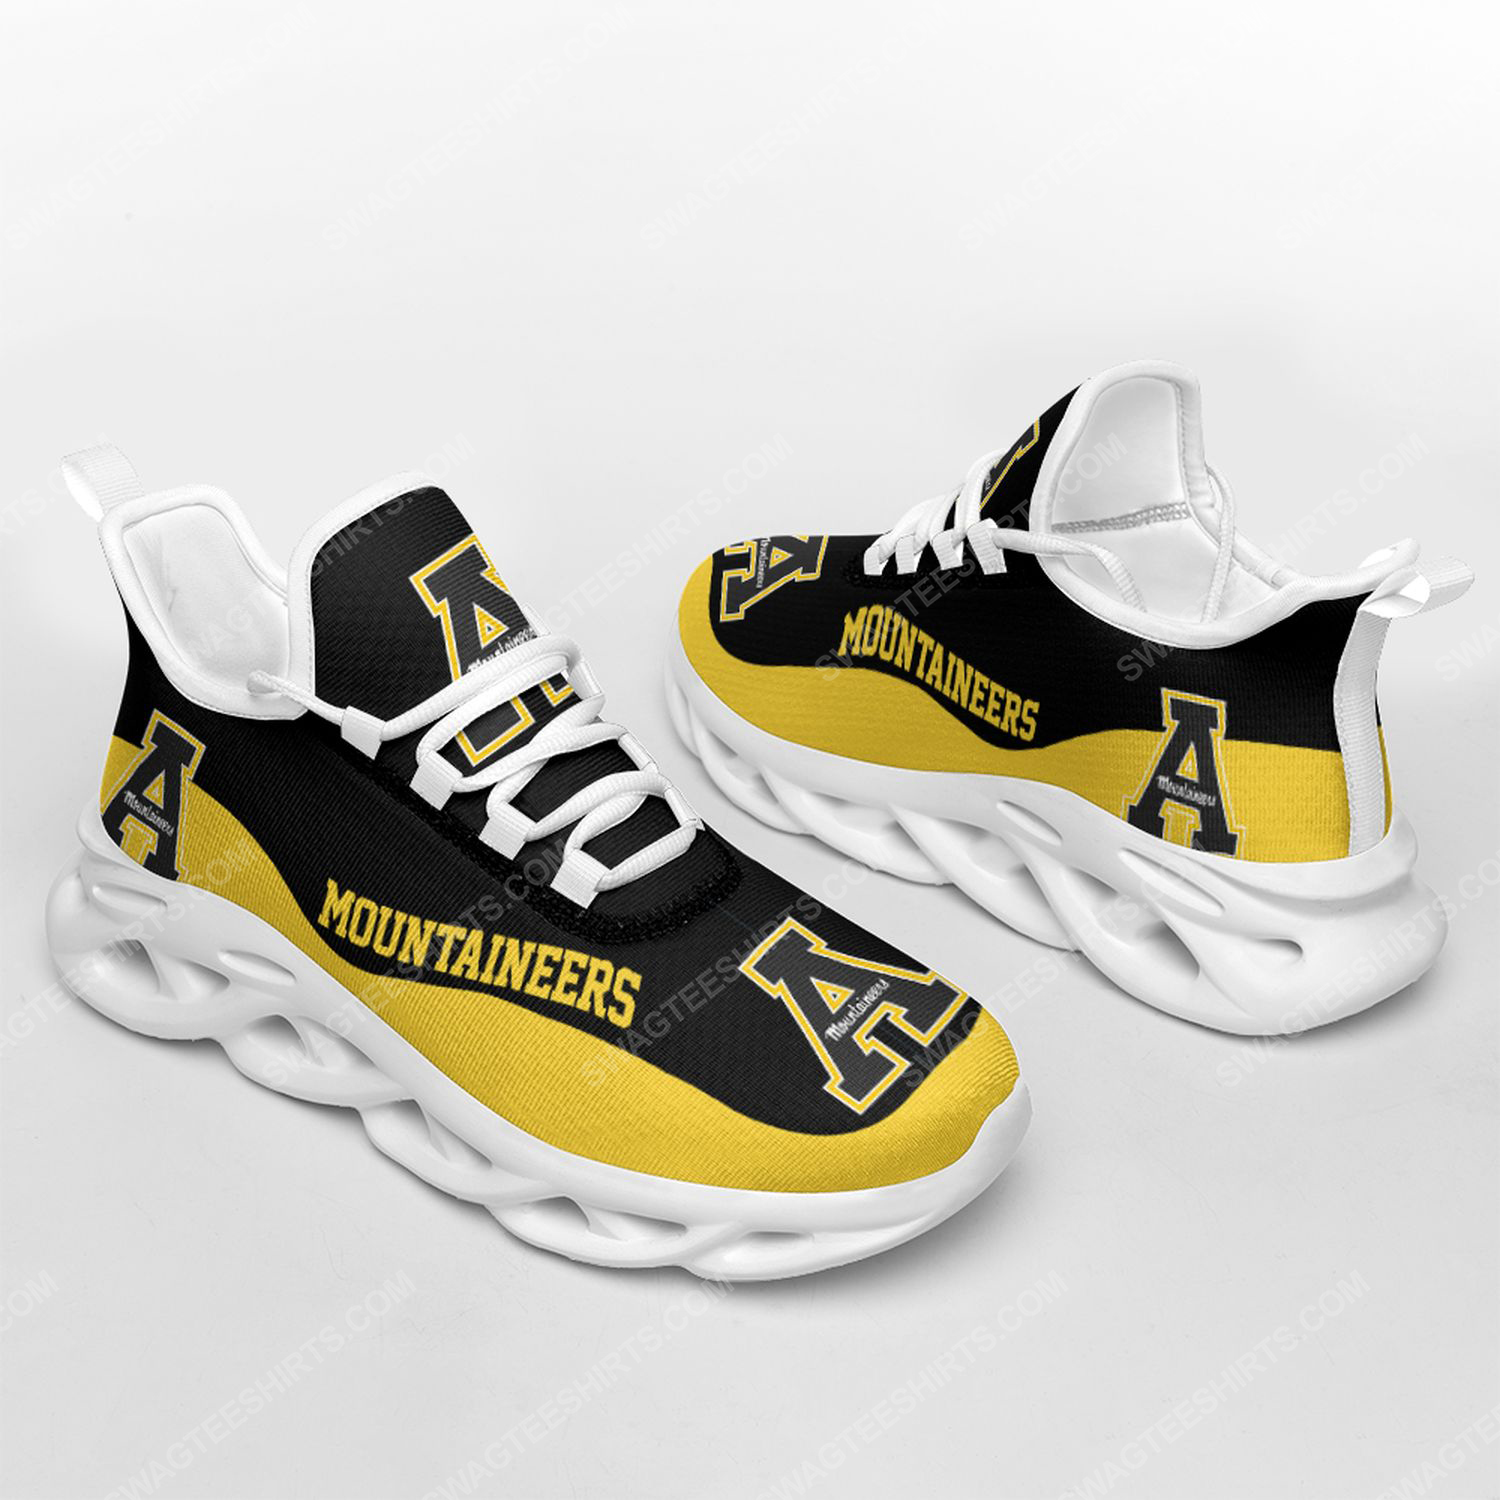 The appalachian state mountaineers football team max soul shoes 2